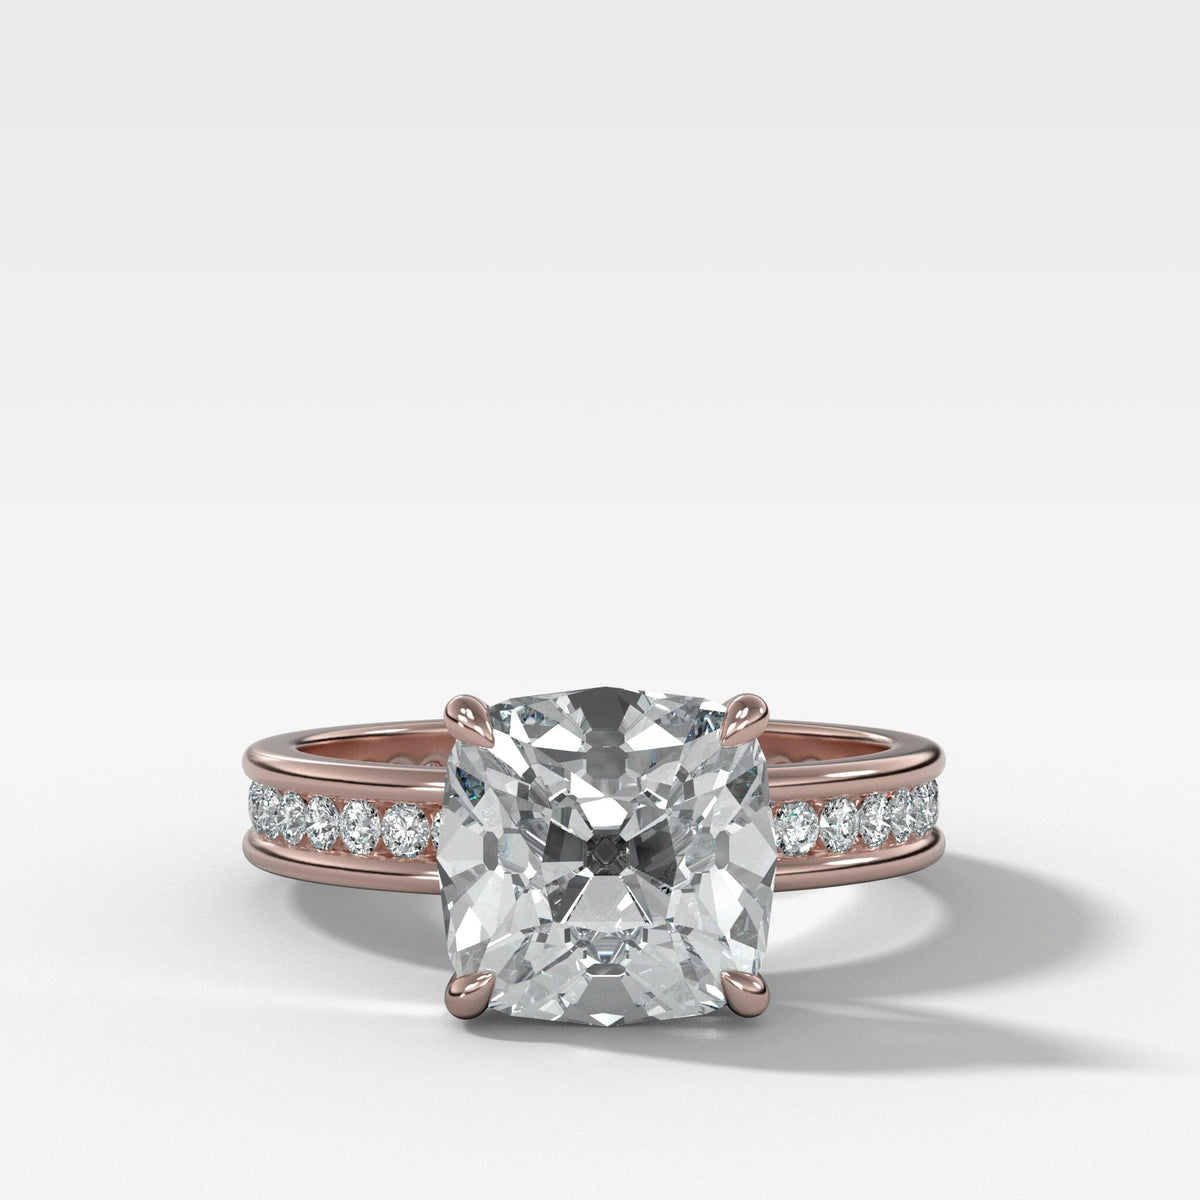 Petite Channel Set Solitaire Engagement Ring with Old Mine Cut Diamond Engagement Good Stone Inc Rose Gold 14k Natural